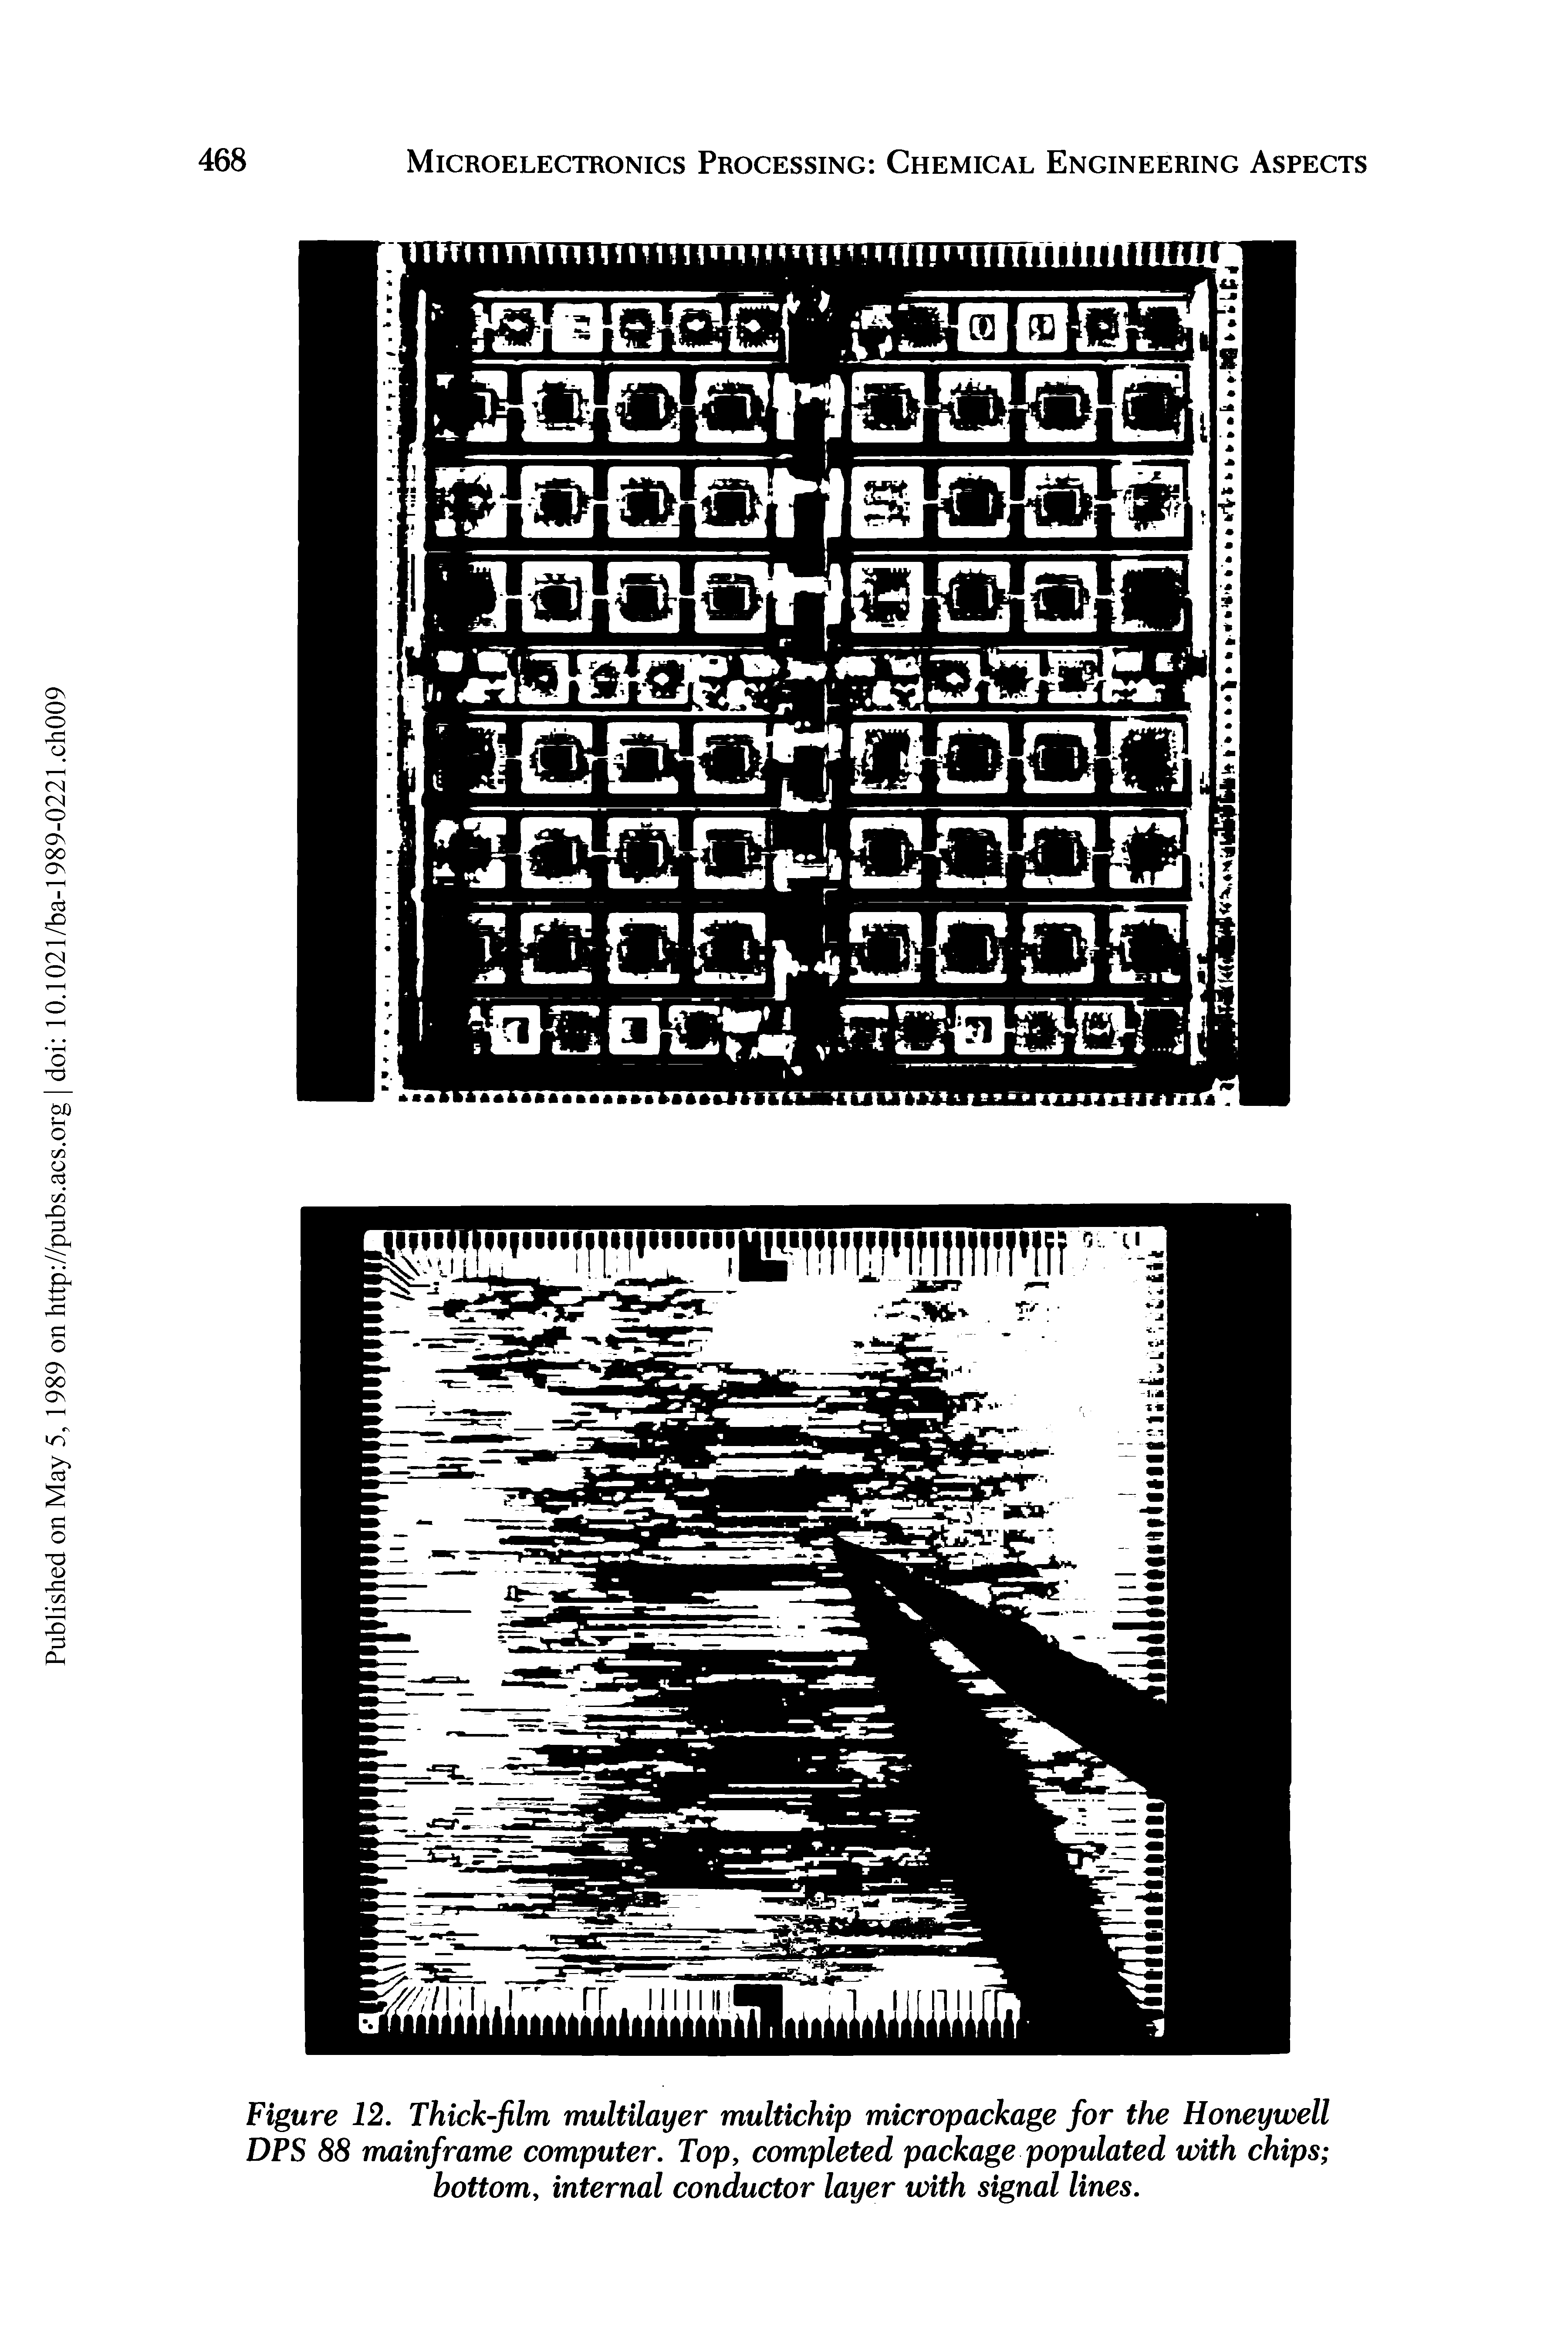 Figure 12. Thick-film multilayer multichip micropackage for the Honeywell DPS 88 mainframe computer. Top, completed package populated with chips bottom, internal conductor layer with signal lines.